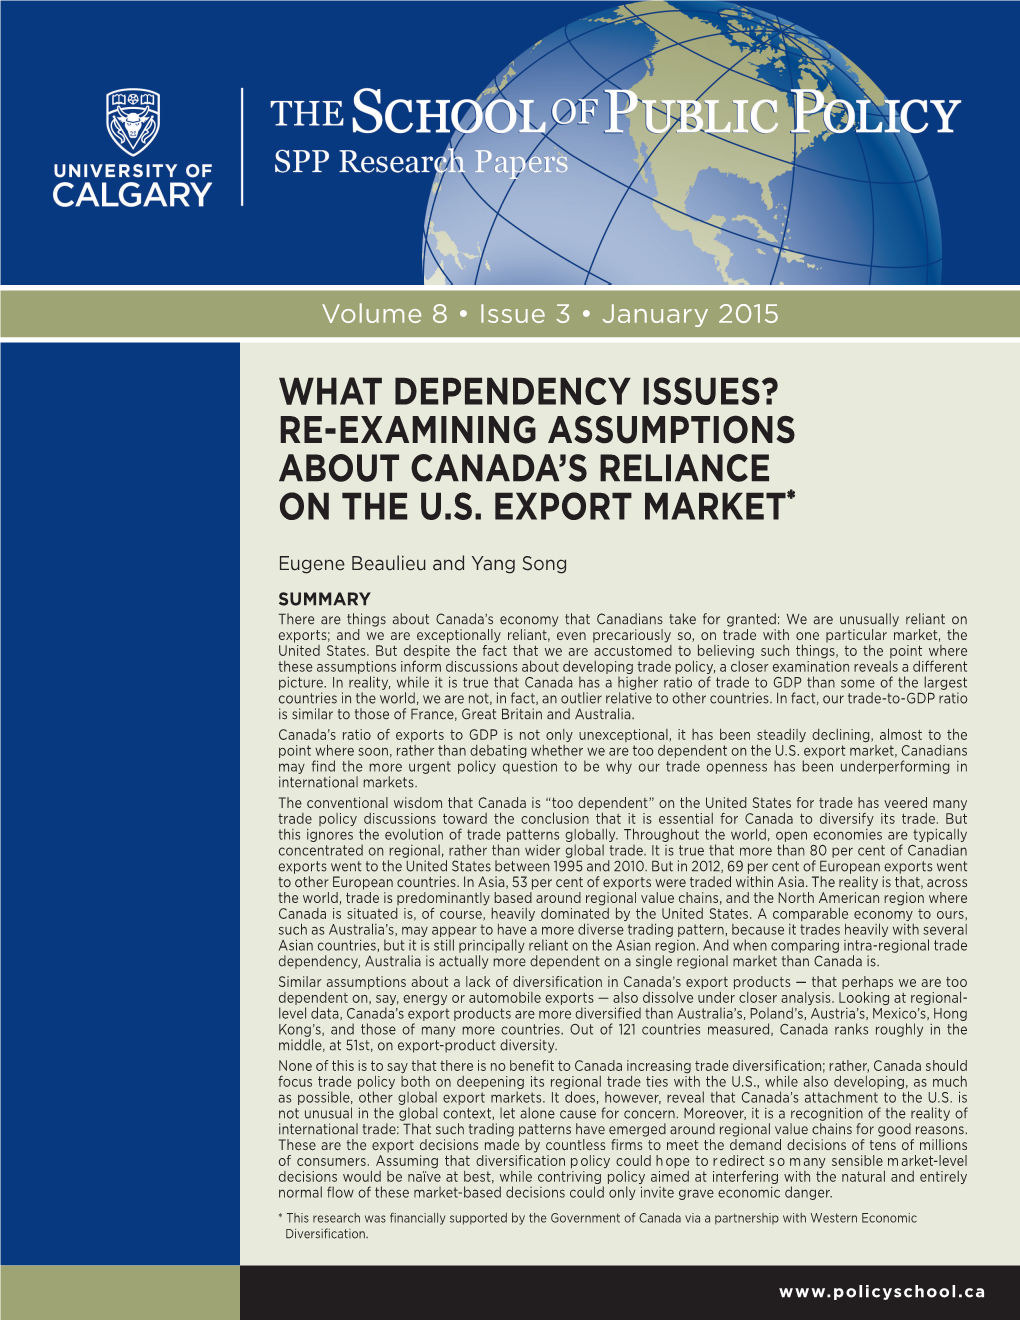 Re-Examining Assumptions About Canada's Reliance on the Us Export